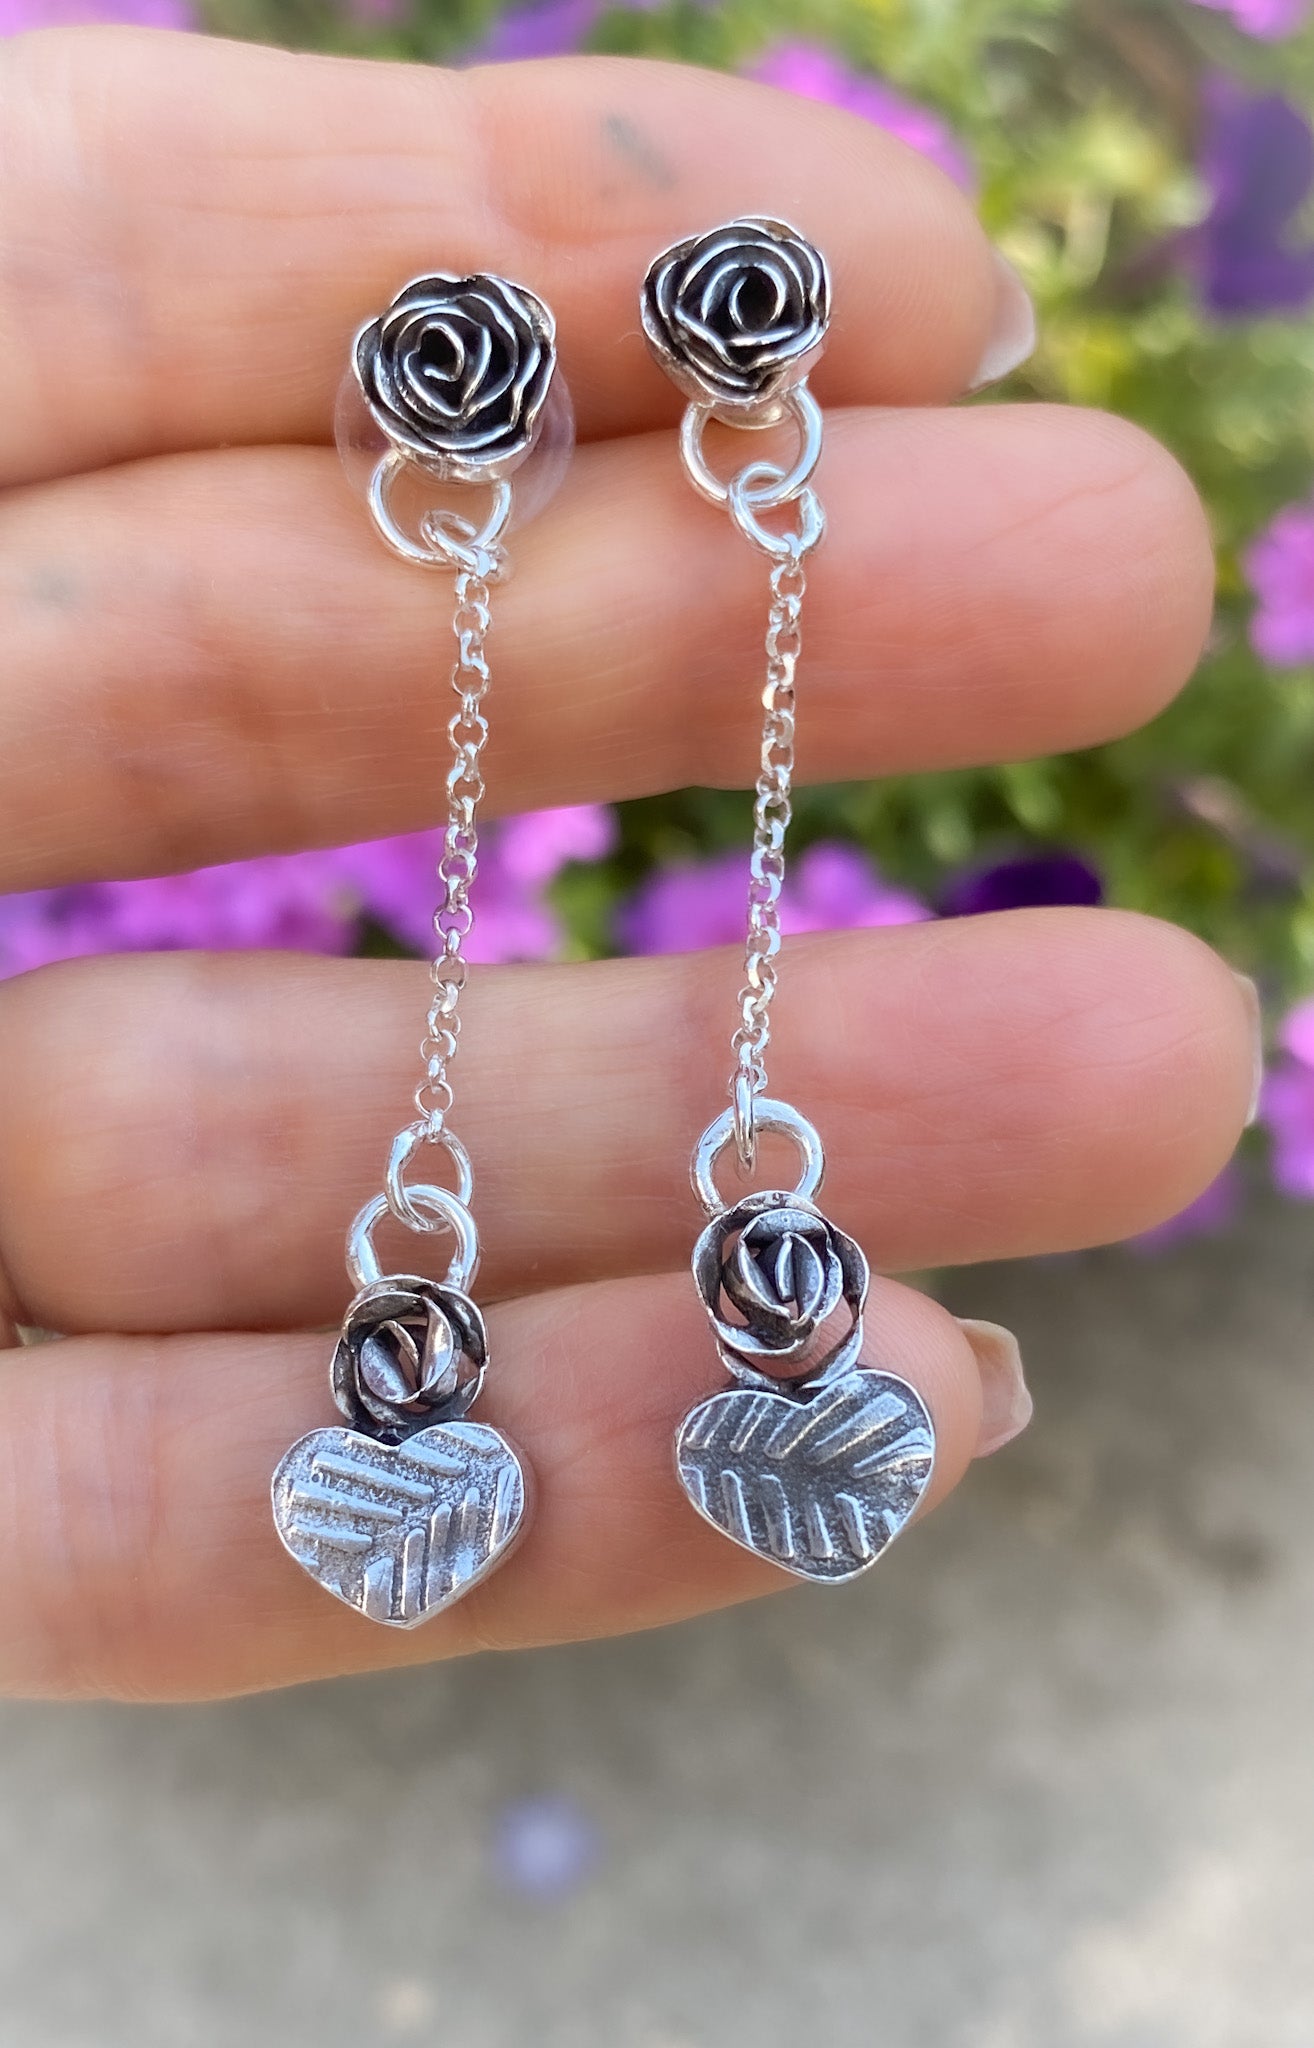 Roses and Hearts Earrings